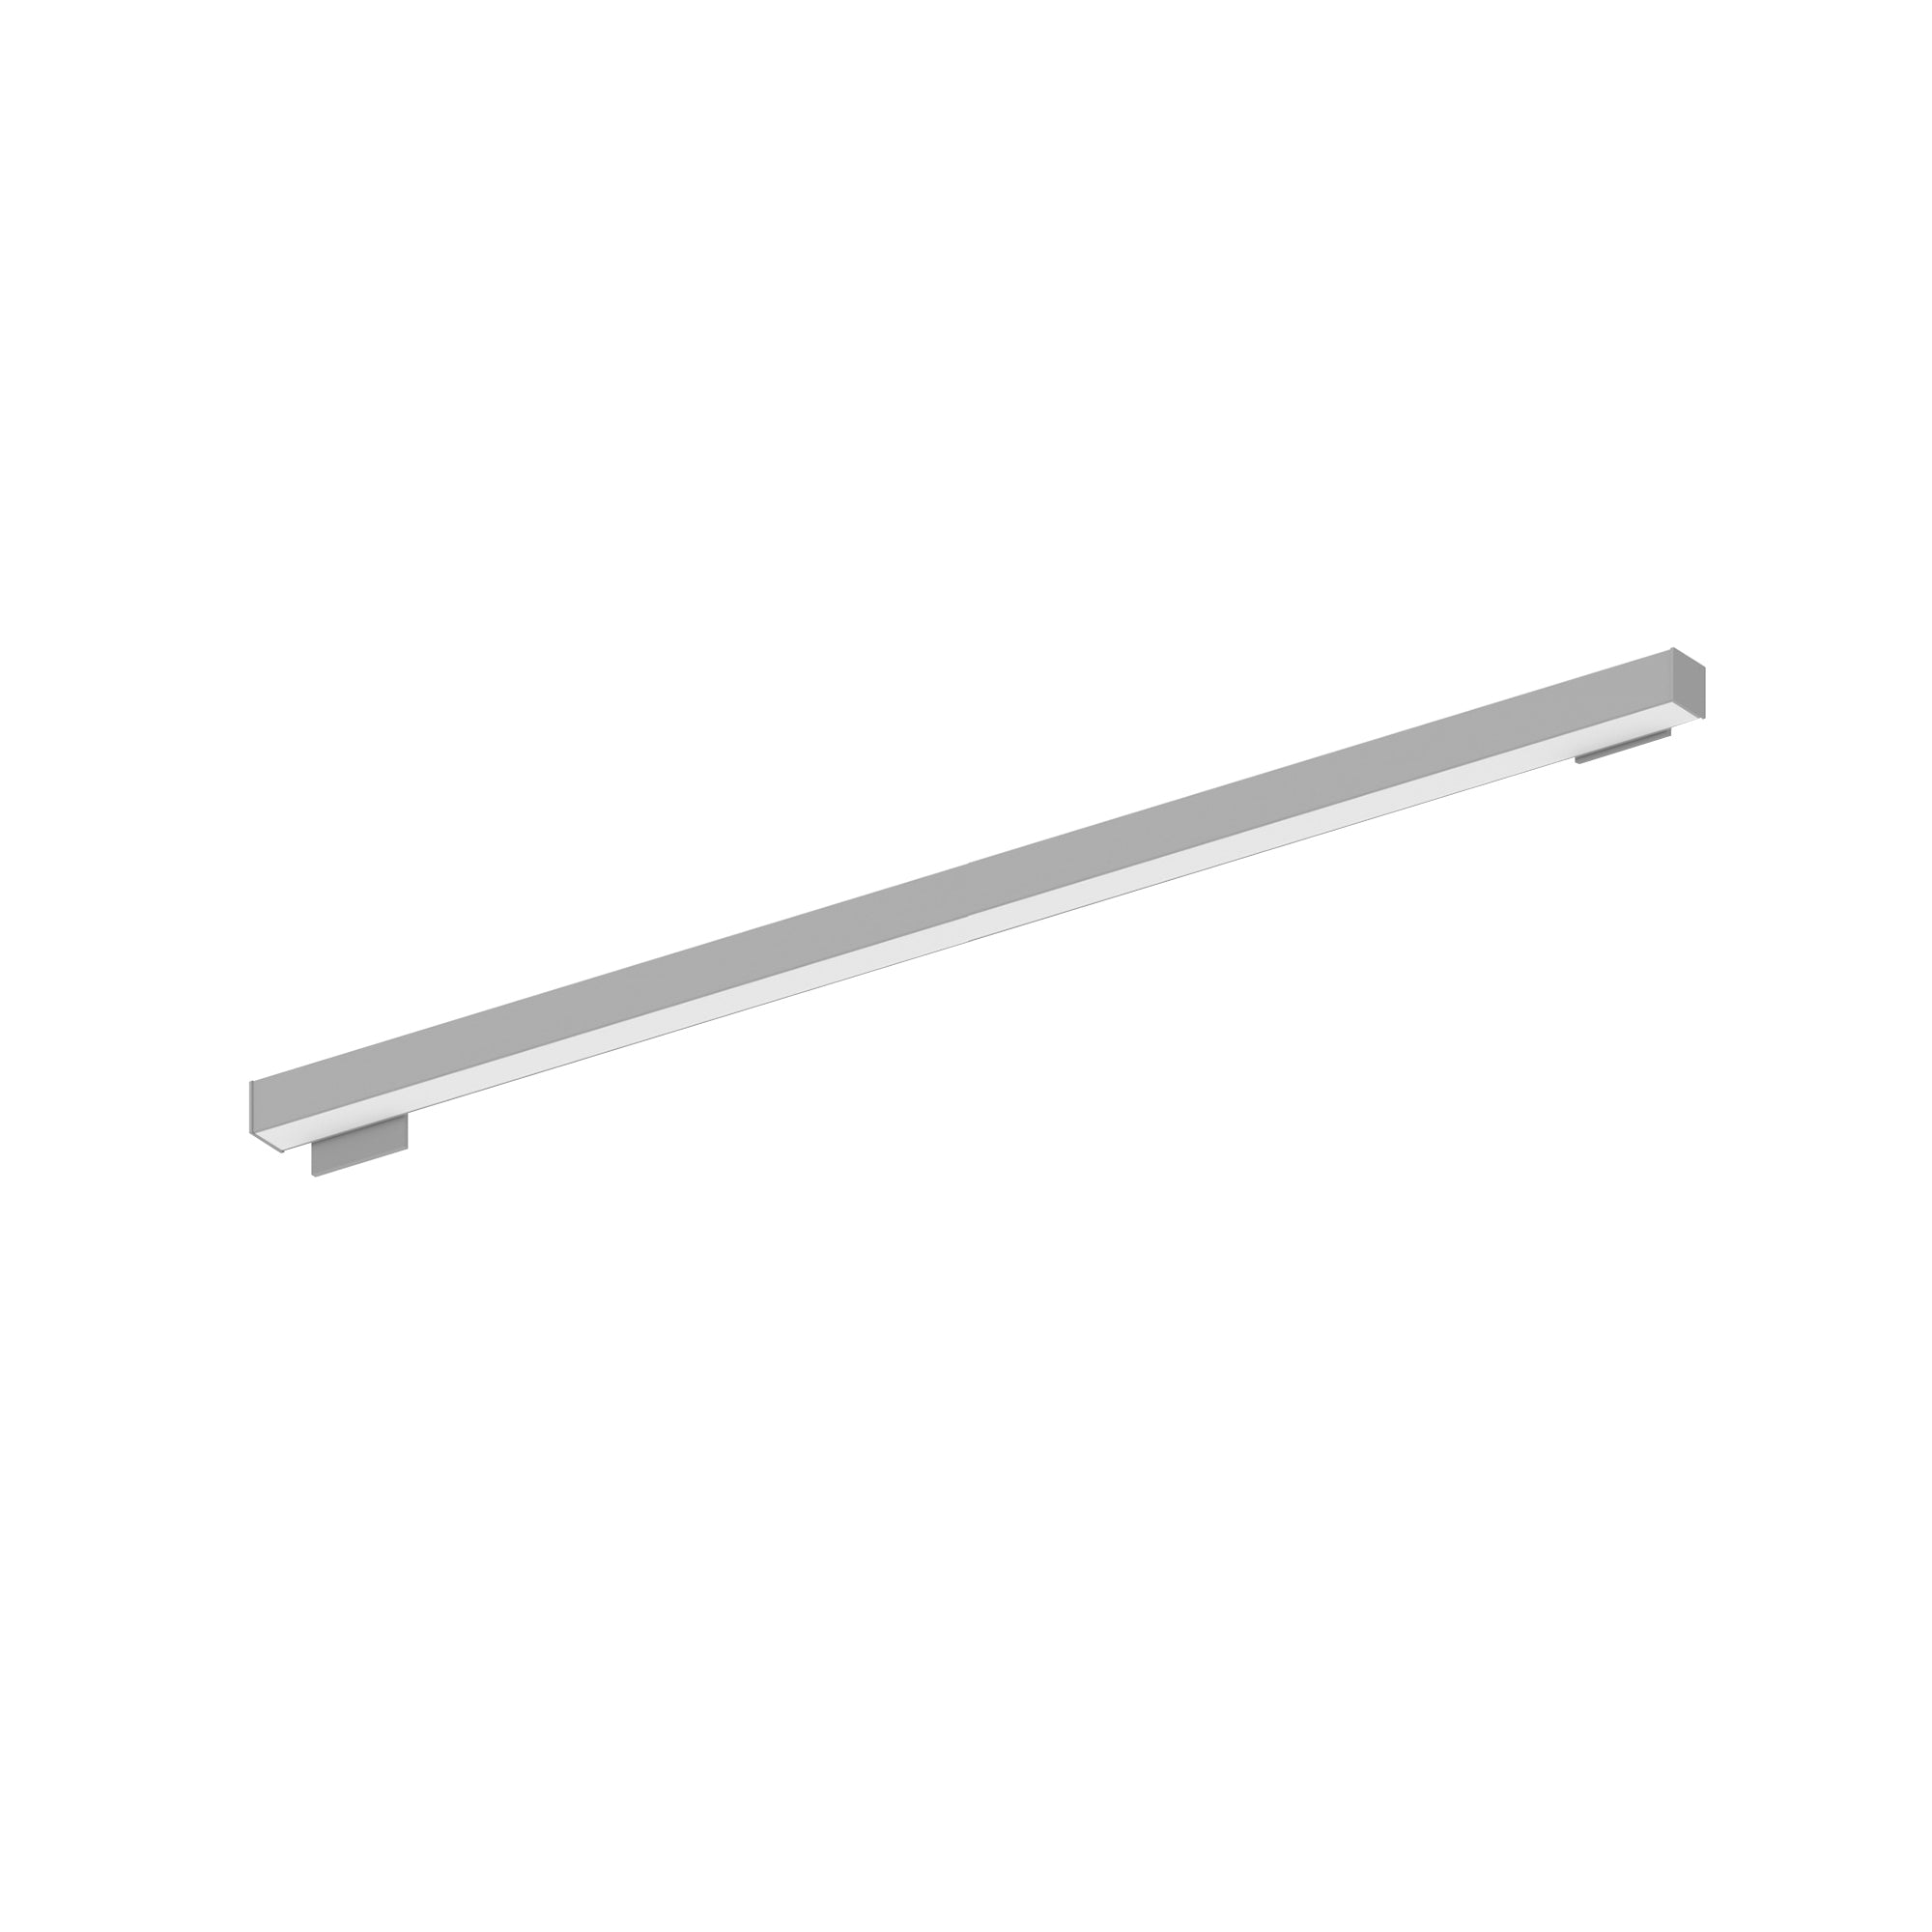 Nora Lighting NWLIN-81040A/L4-R2 - Linear - 8' L-Line LED Wall Mount Linear, 8400lm / 4000K, 4 Inchx4 Inch Left Plate & 2 Inchx4 Inch Right Plate, Aluminum Finish